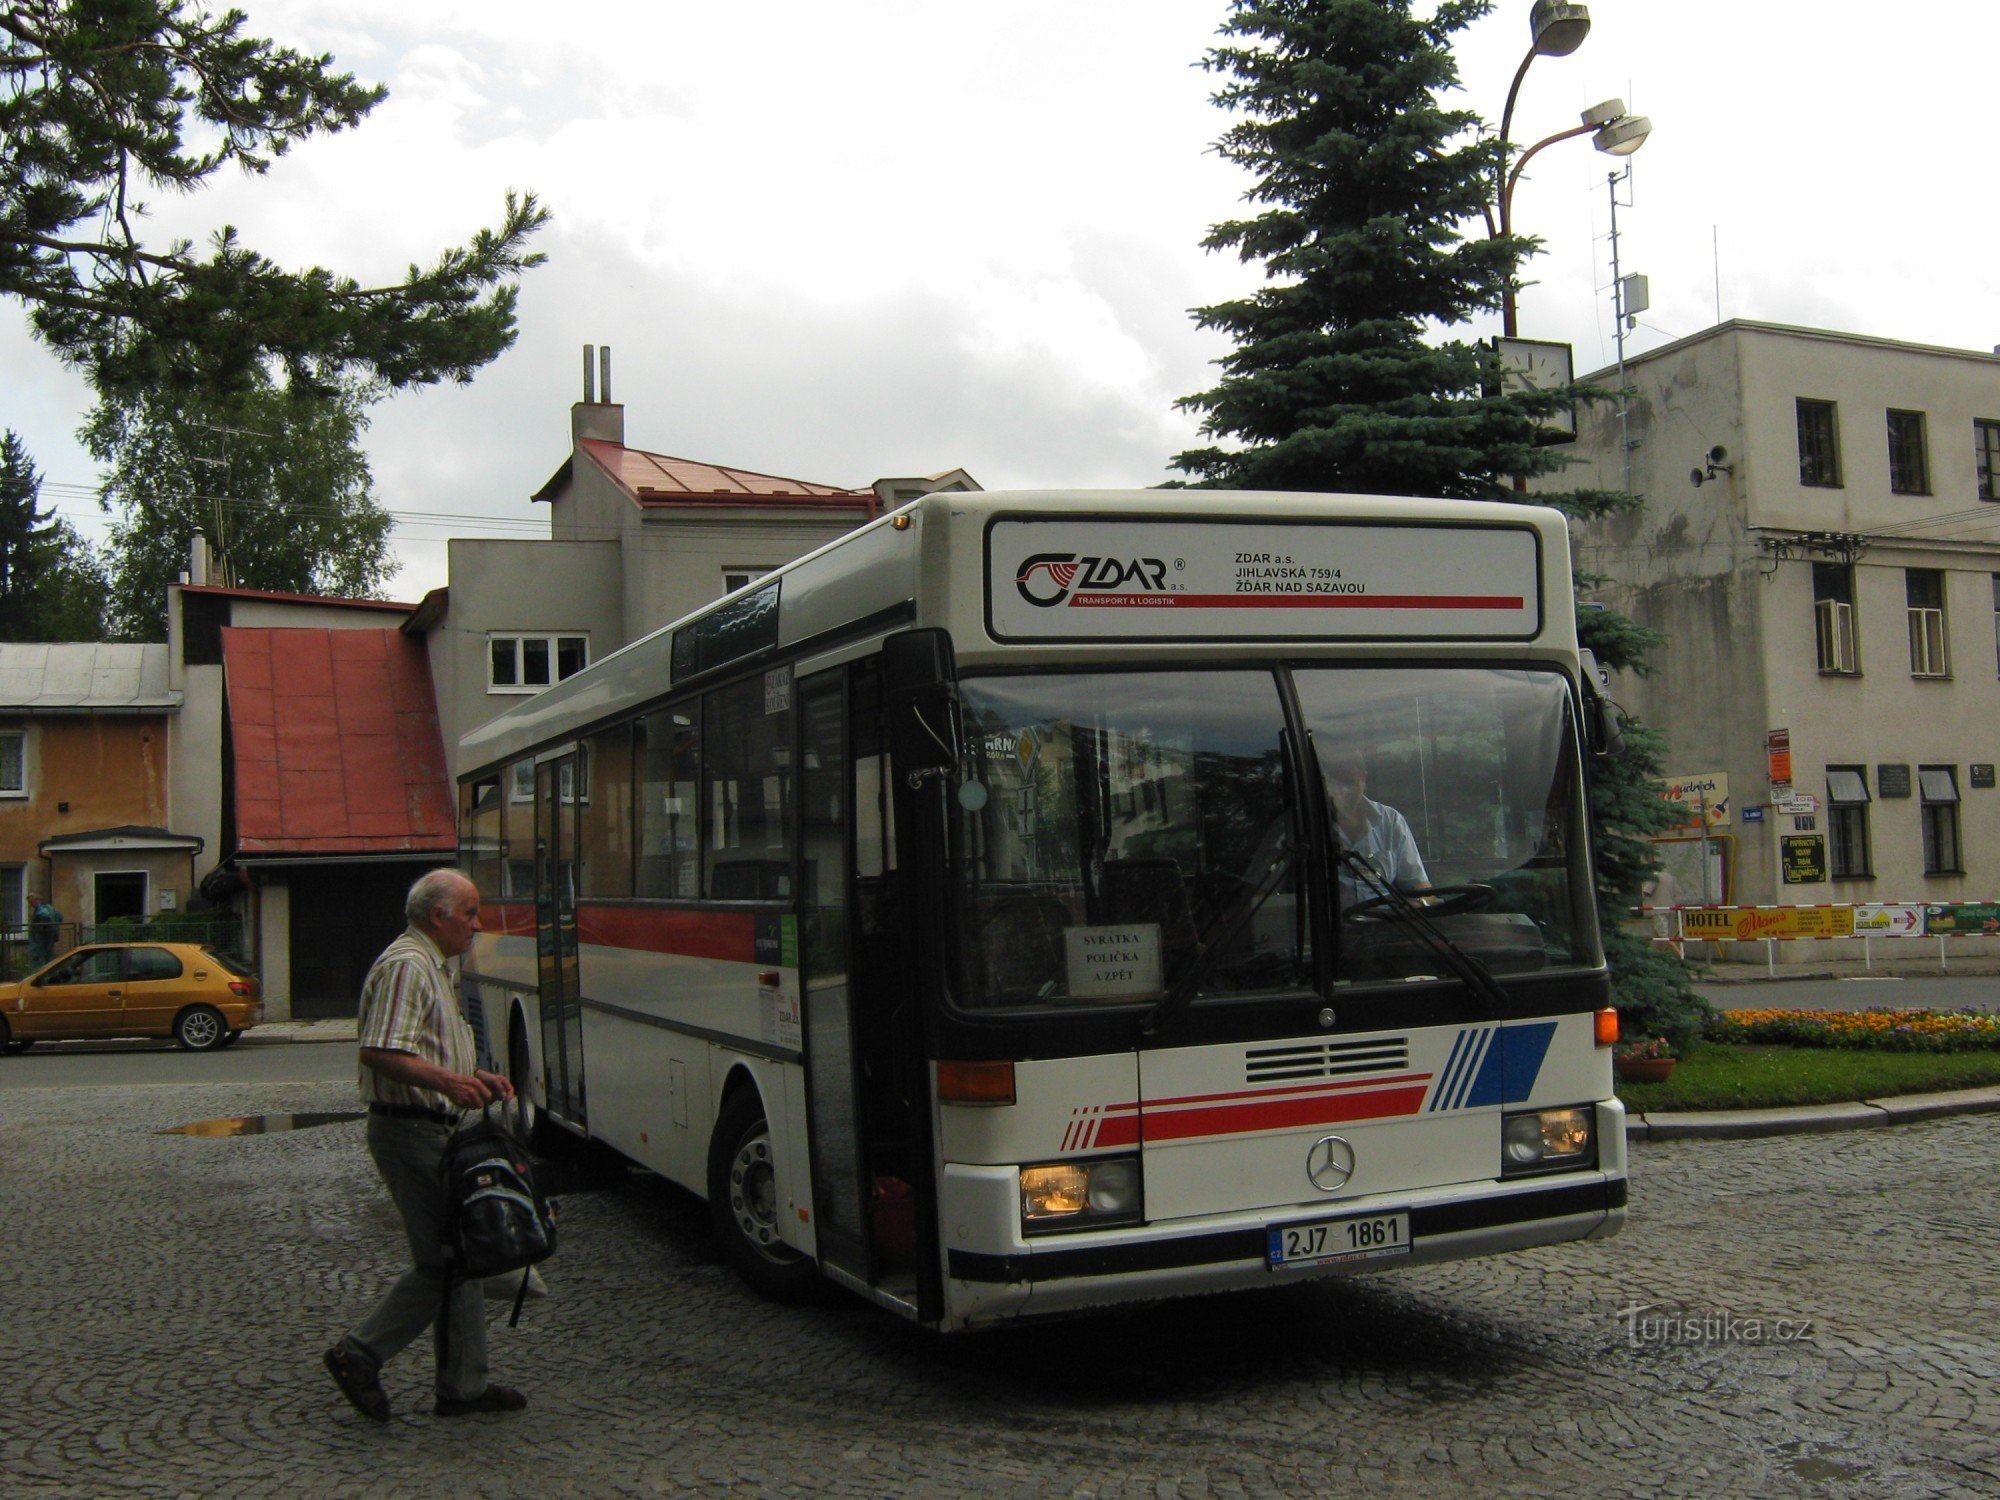 Bus at the roundabout in Svratka